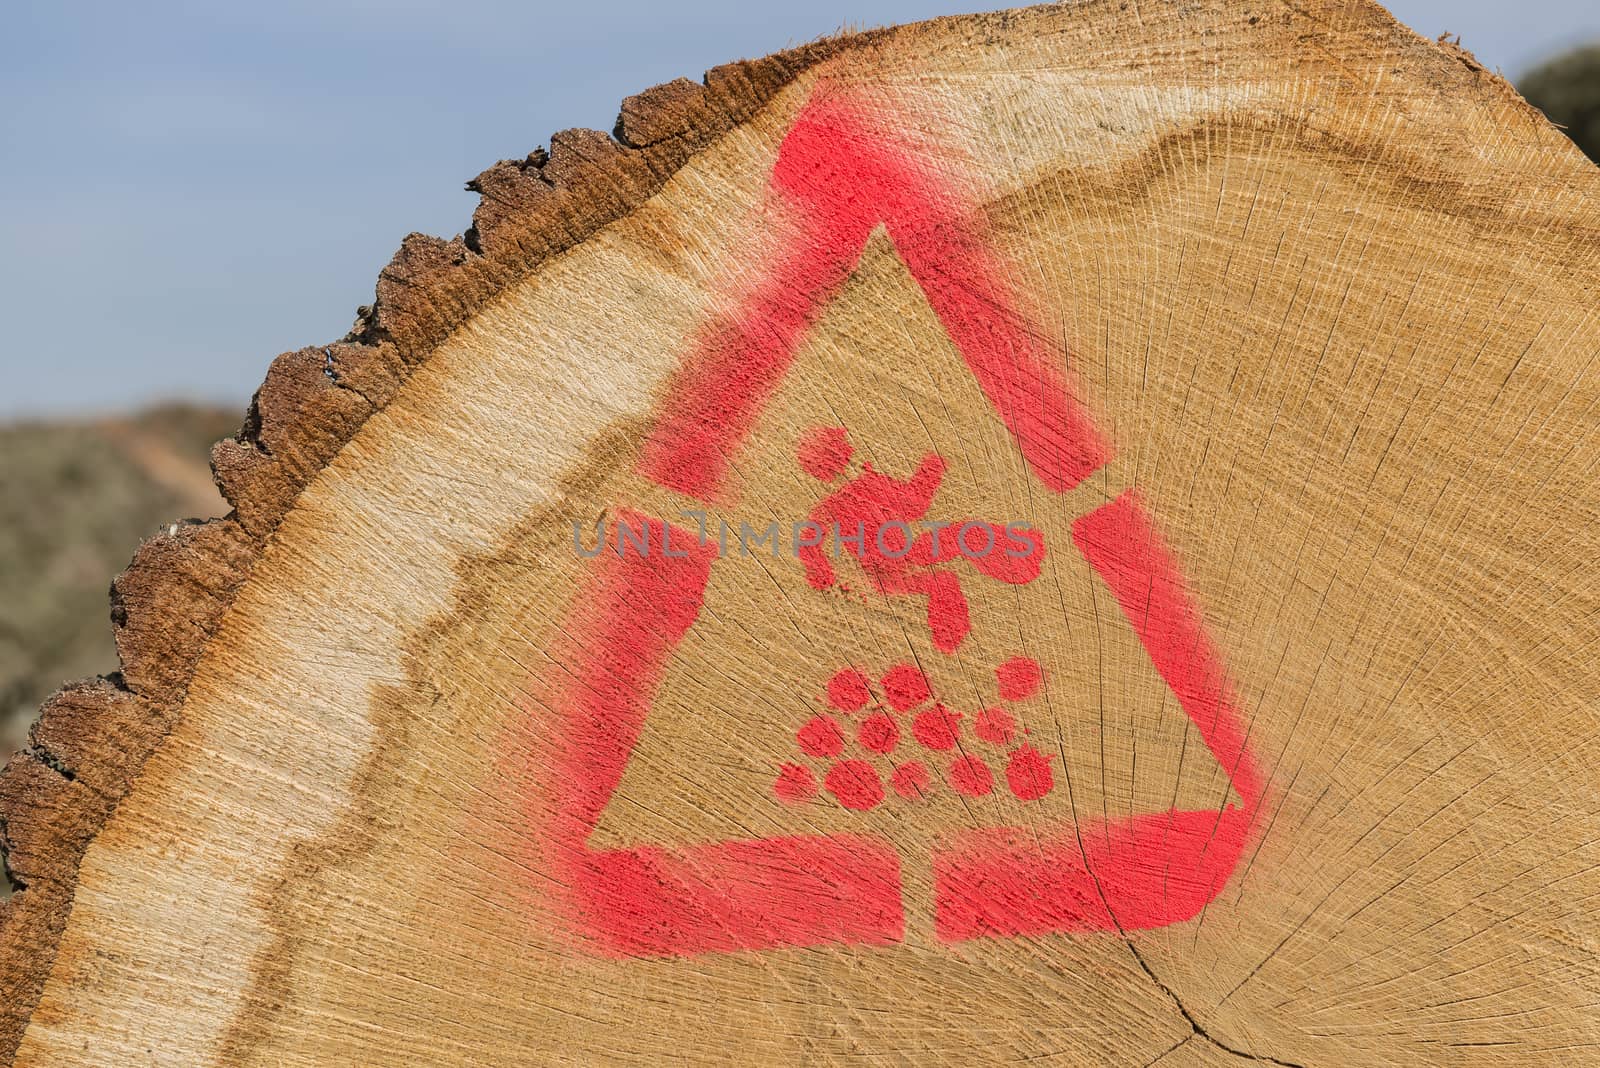 Sawn trunks stacked on the side of the road with warning icons against ascend in the Netherlands
